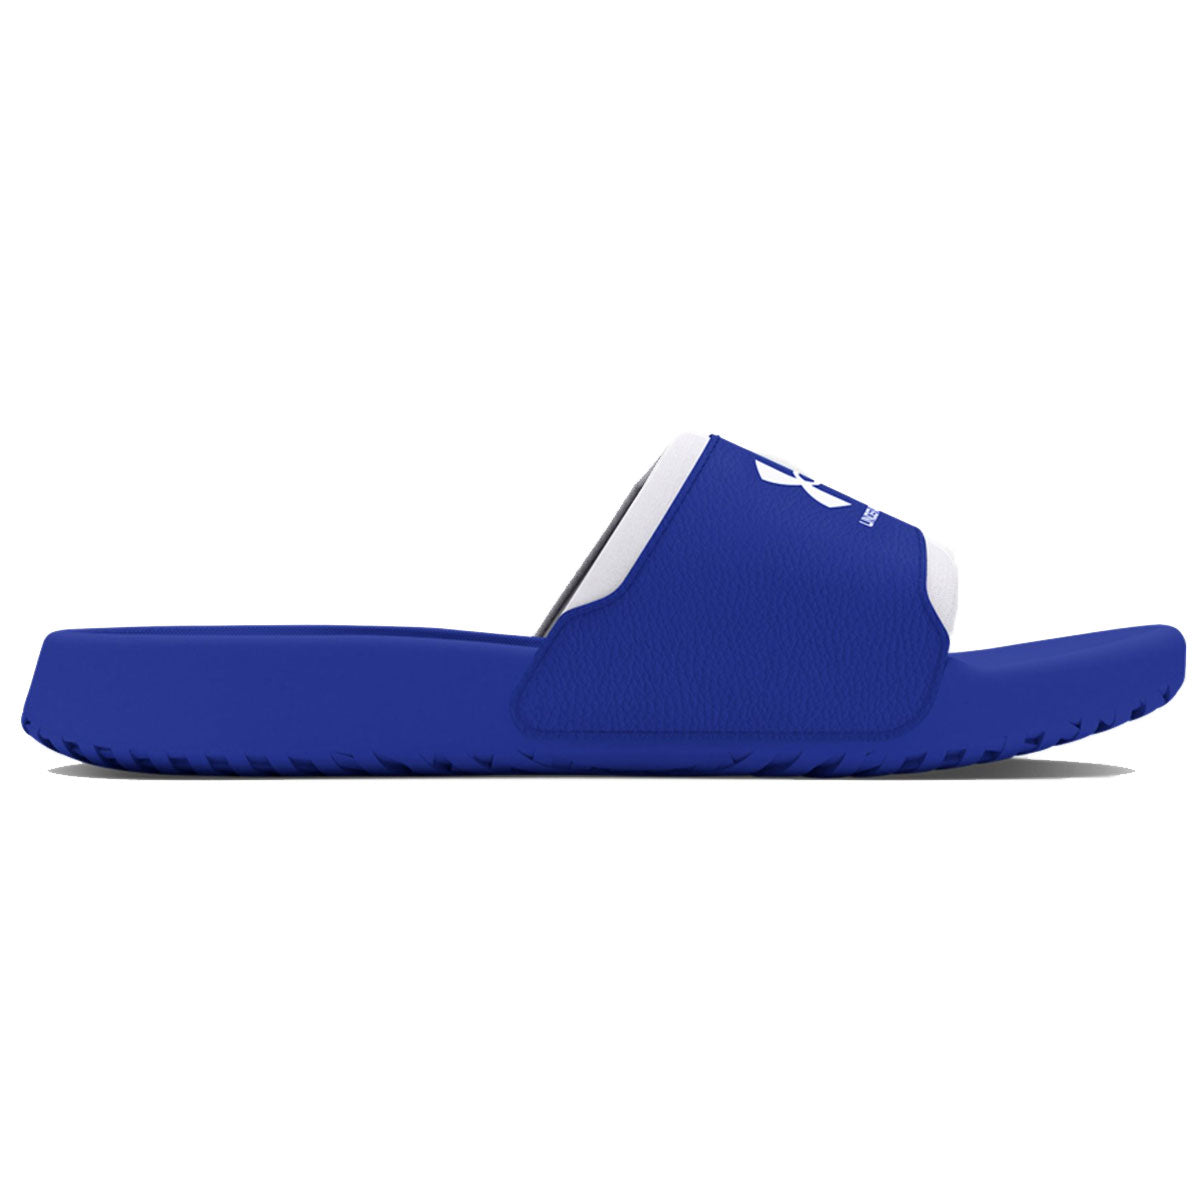 Under Armour Ignite Select Sliders - Adult - Blue/White